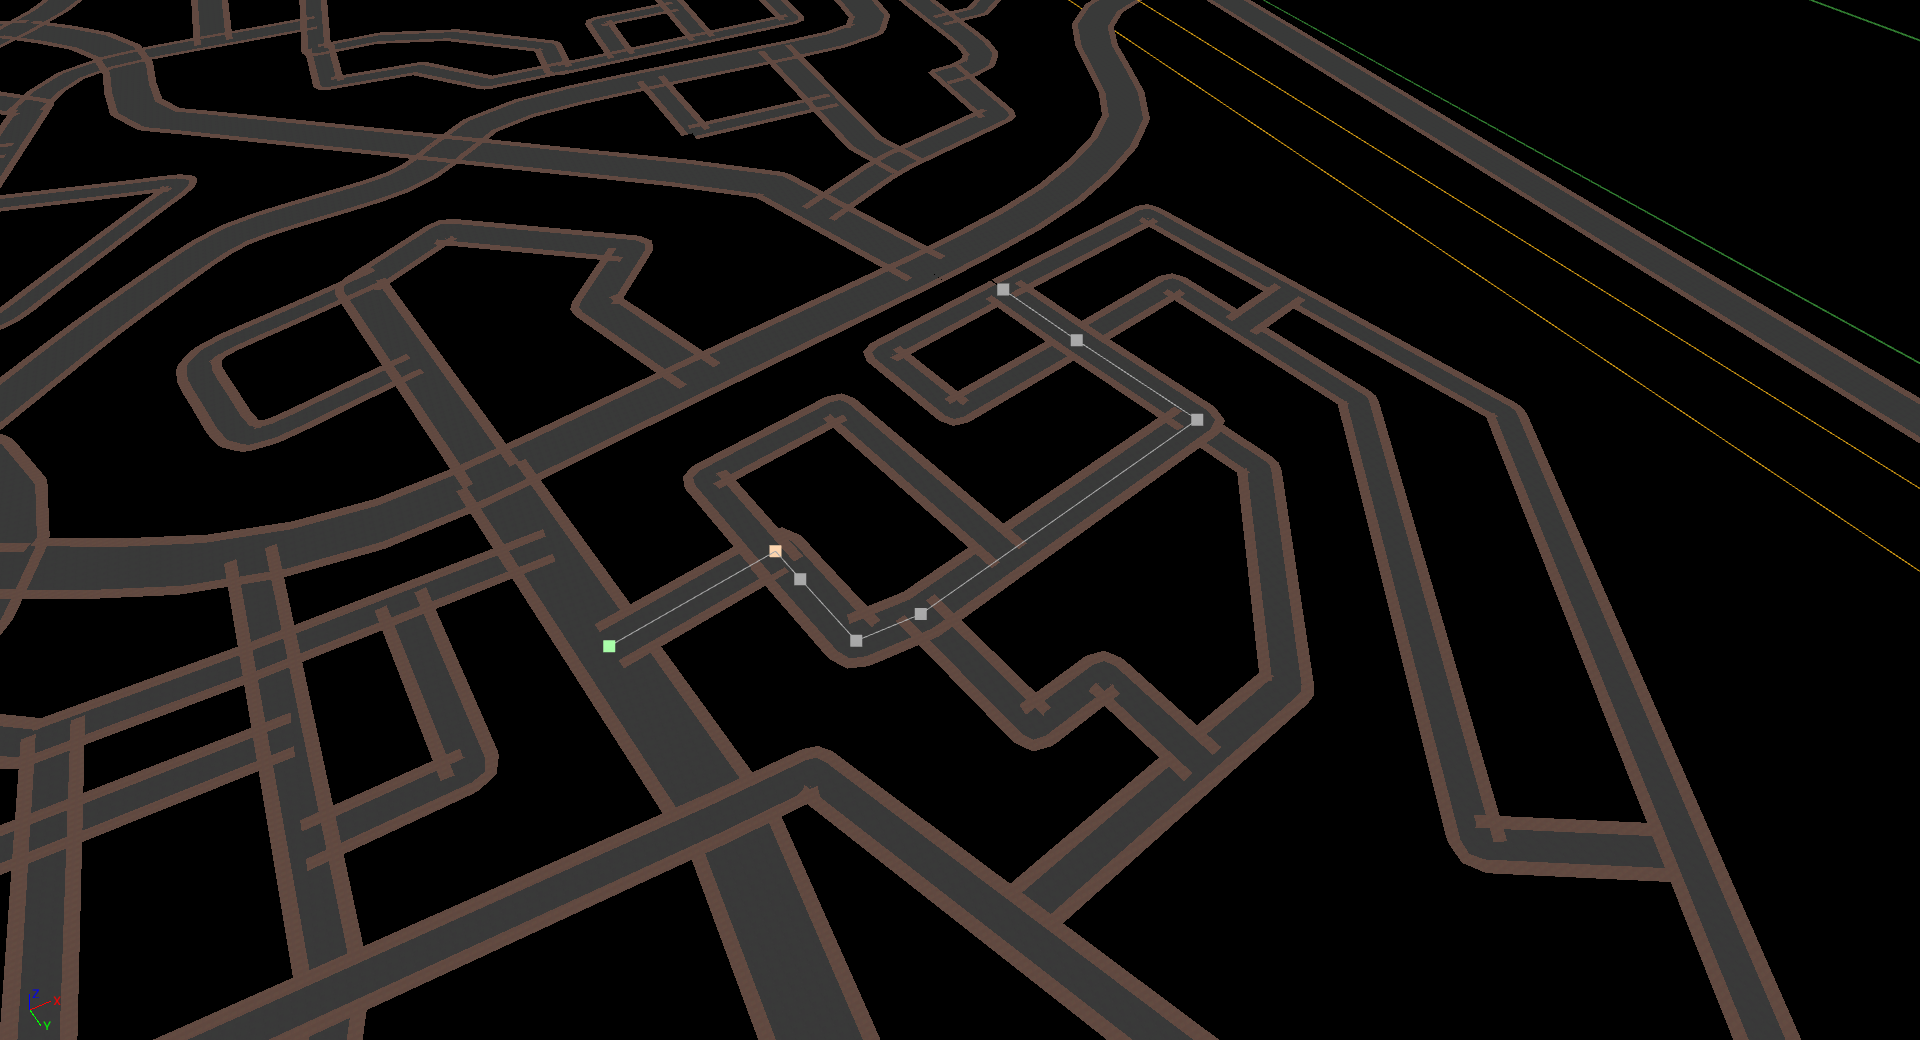 Preview road meshes. You can see the spline control points of the road that is selected